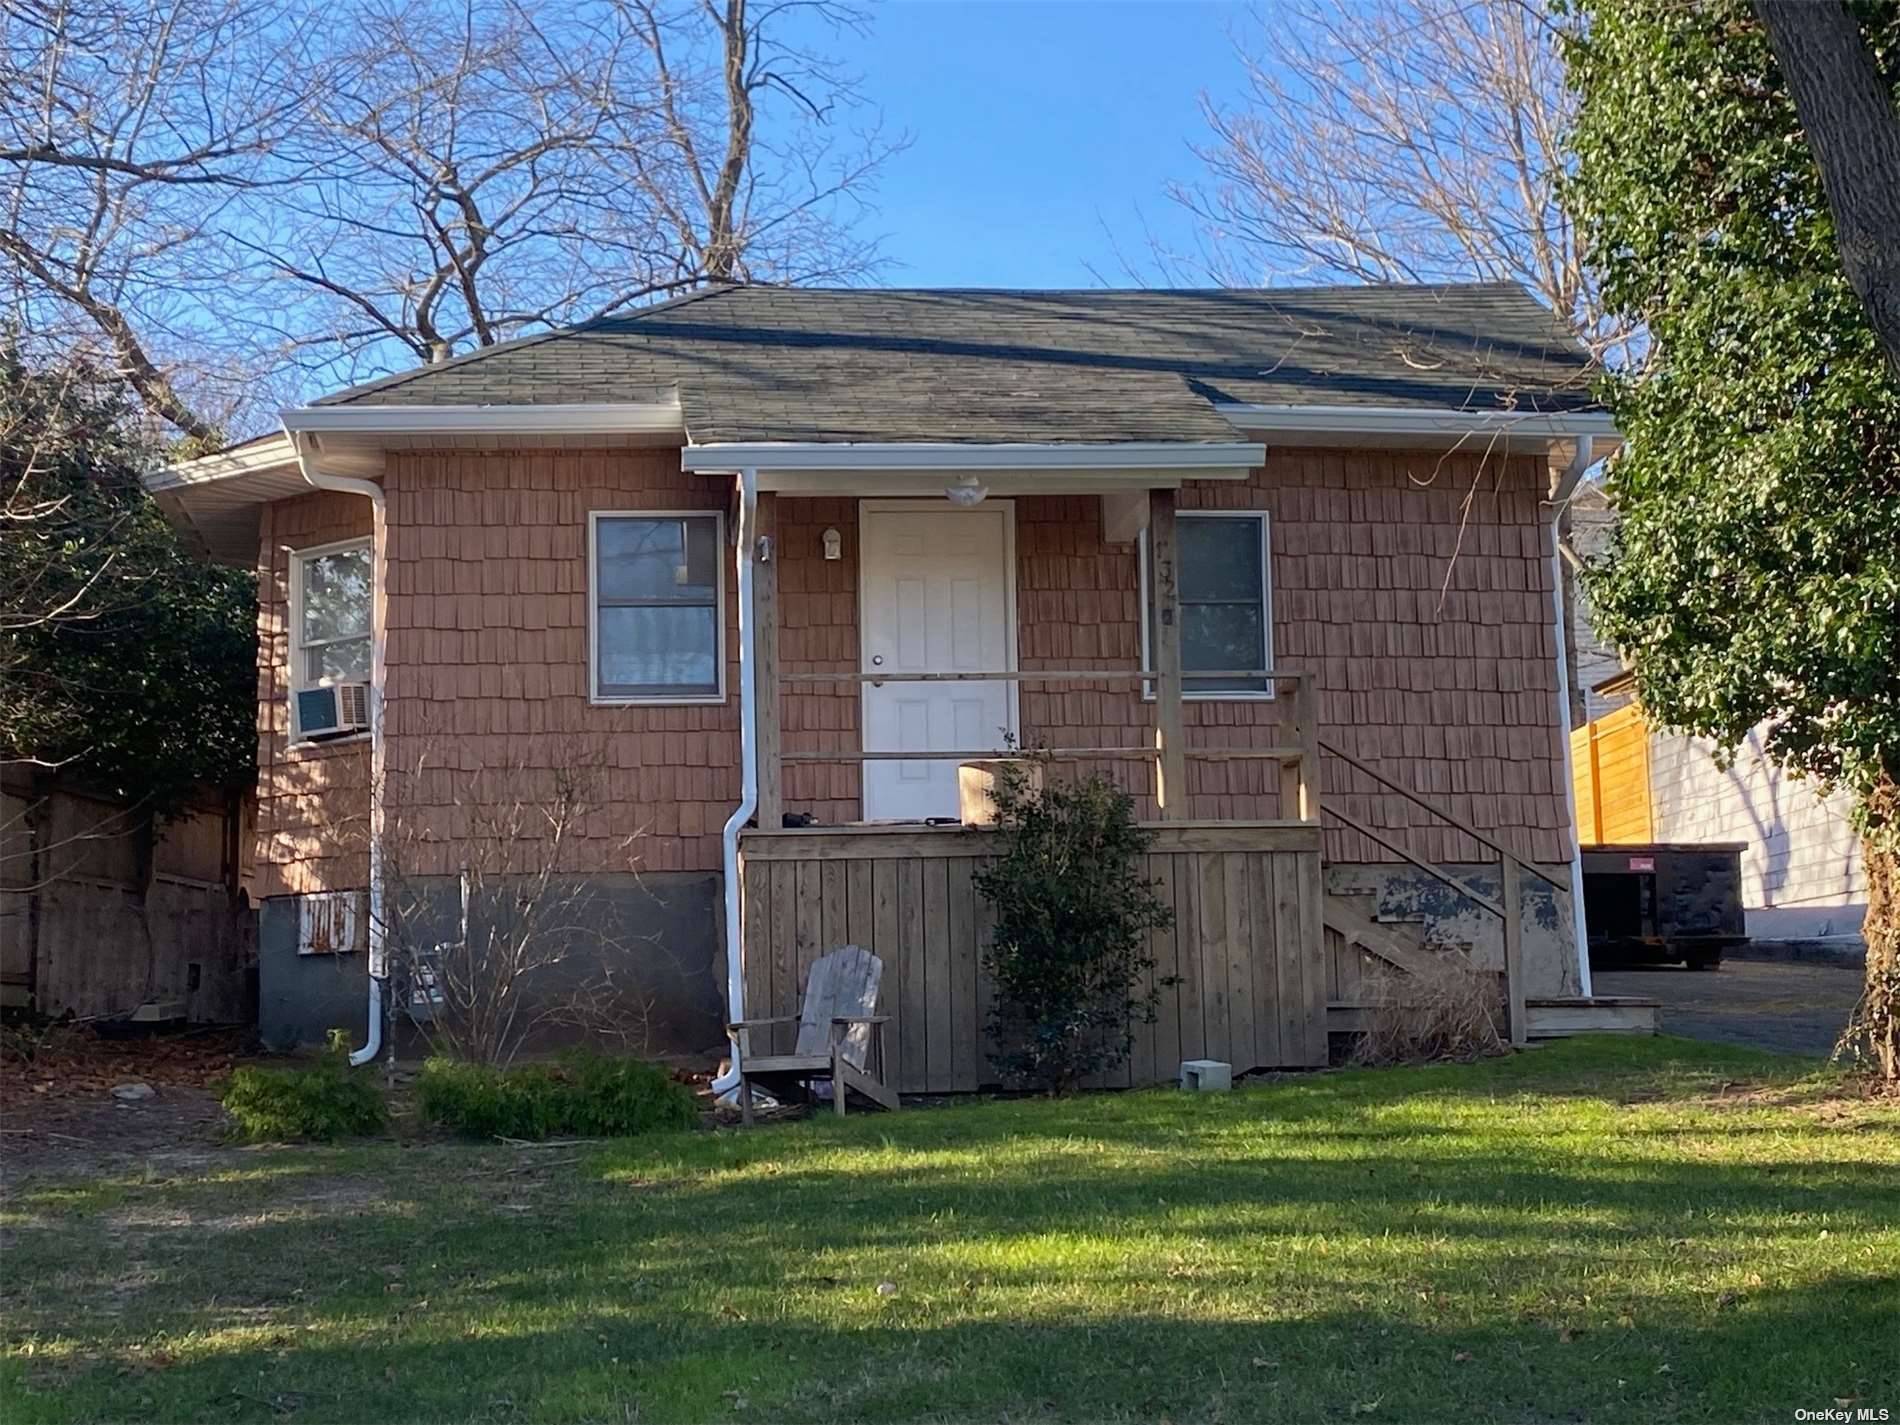 Updated 2 bed 1 bath cottage close to all, new tiled bath, kitchen, carpet, paint, basement, Gas heat, rear yard, no smoking or pets, credit check and references please.